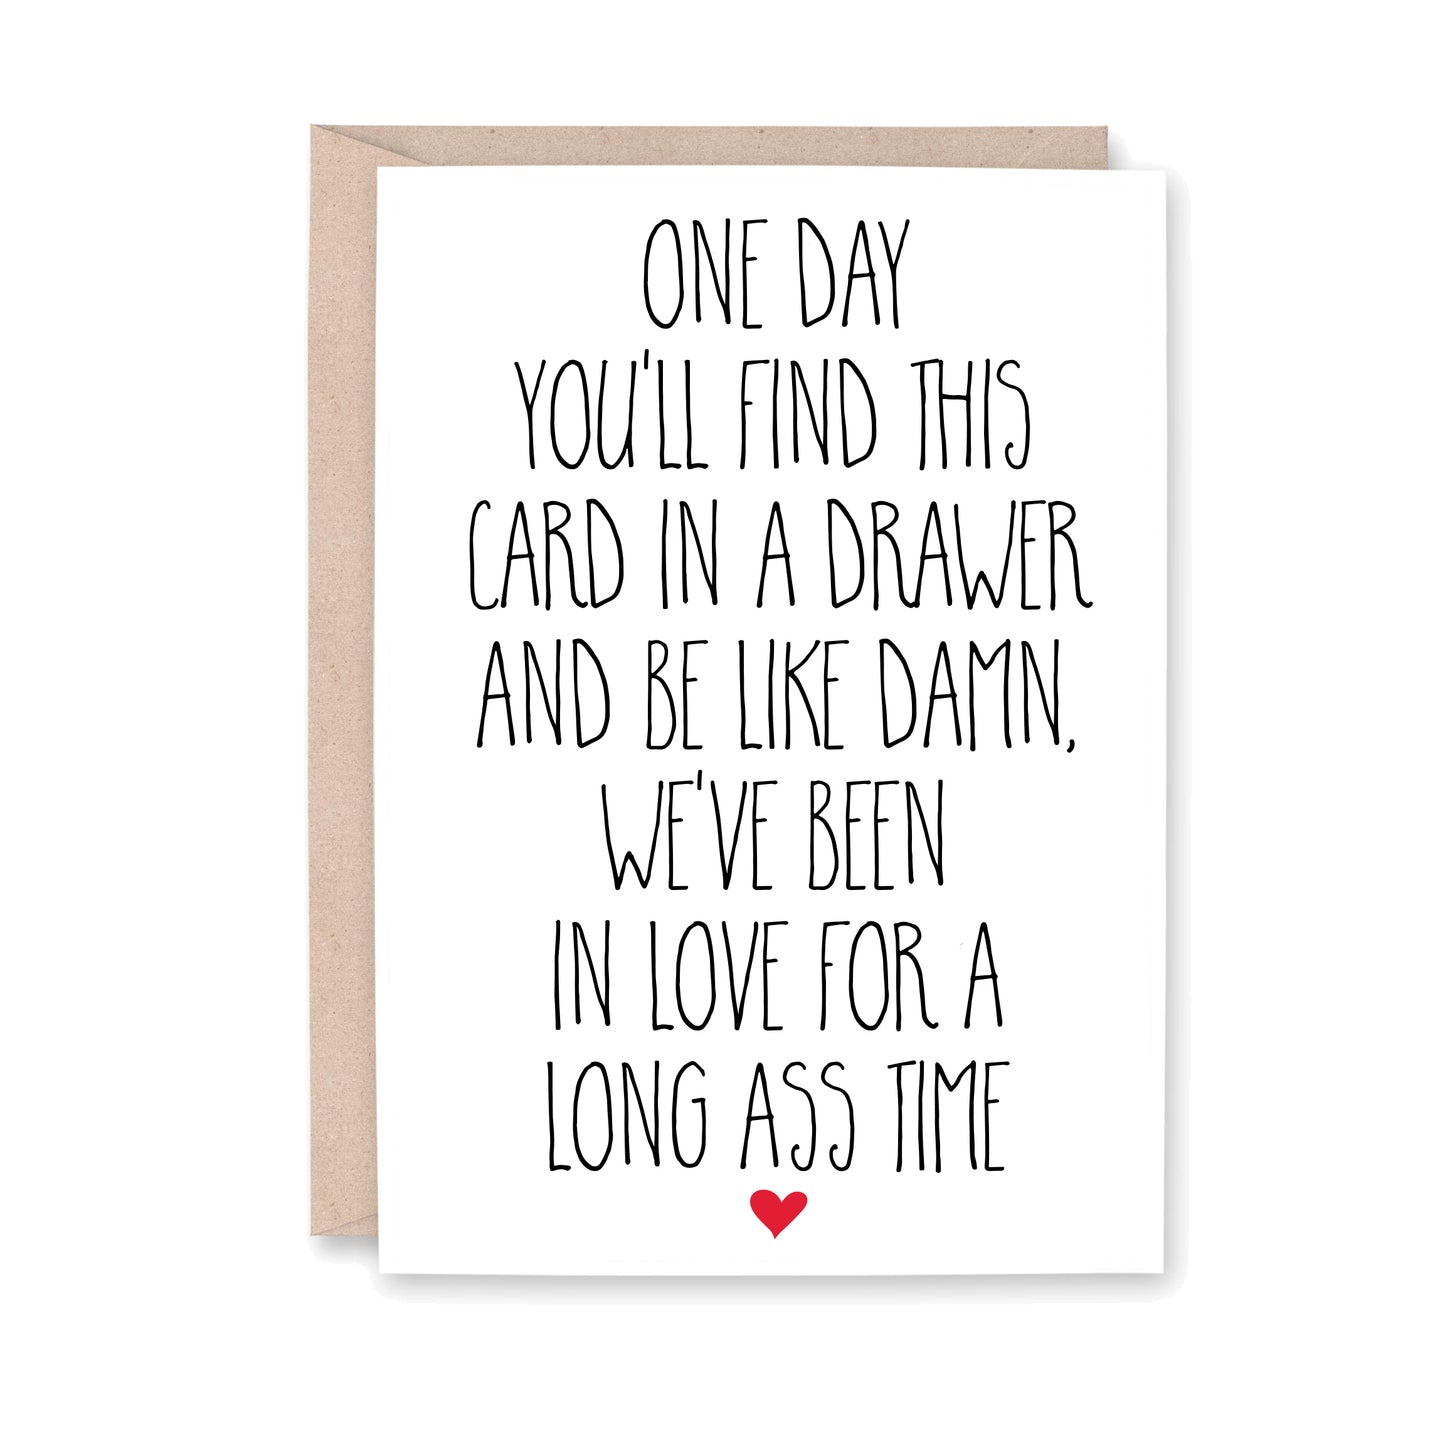 One day you'll find this card in a drawer and be like damn, we've been in love for a long ass time